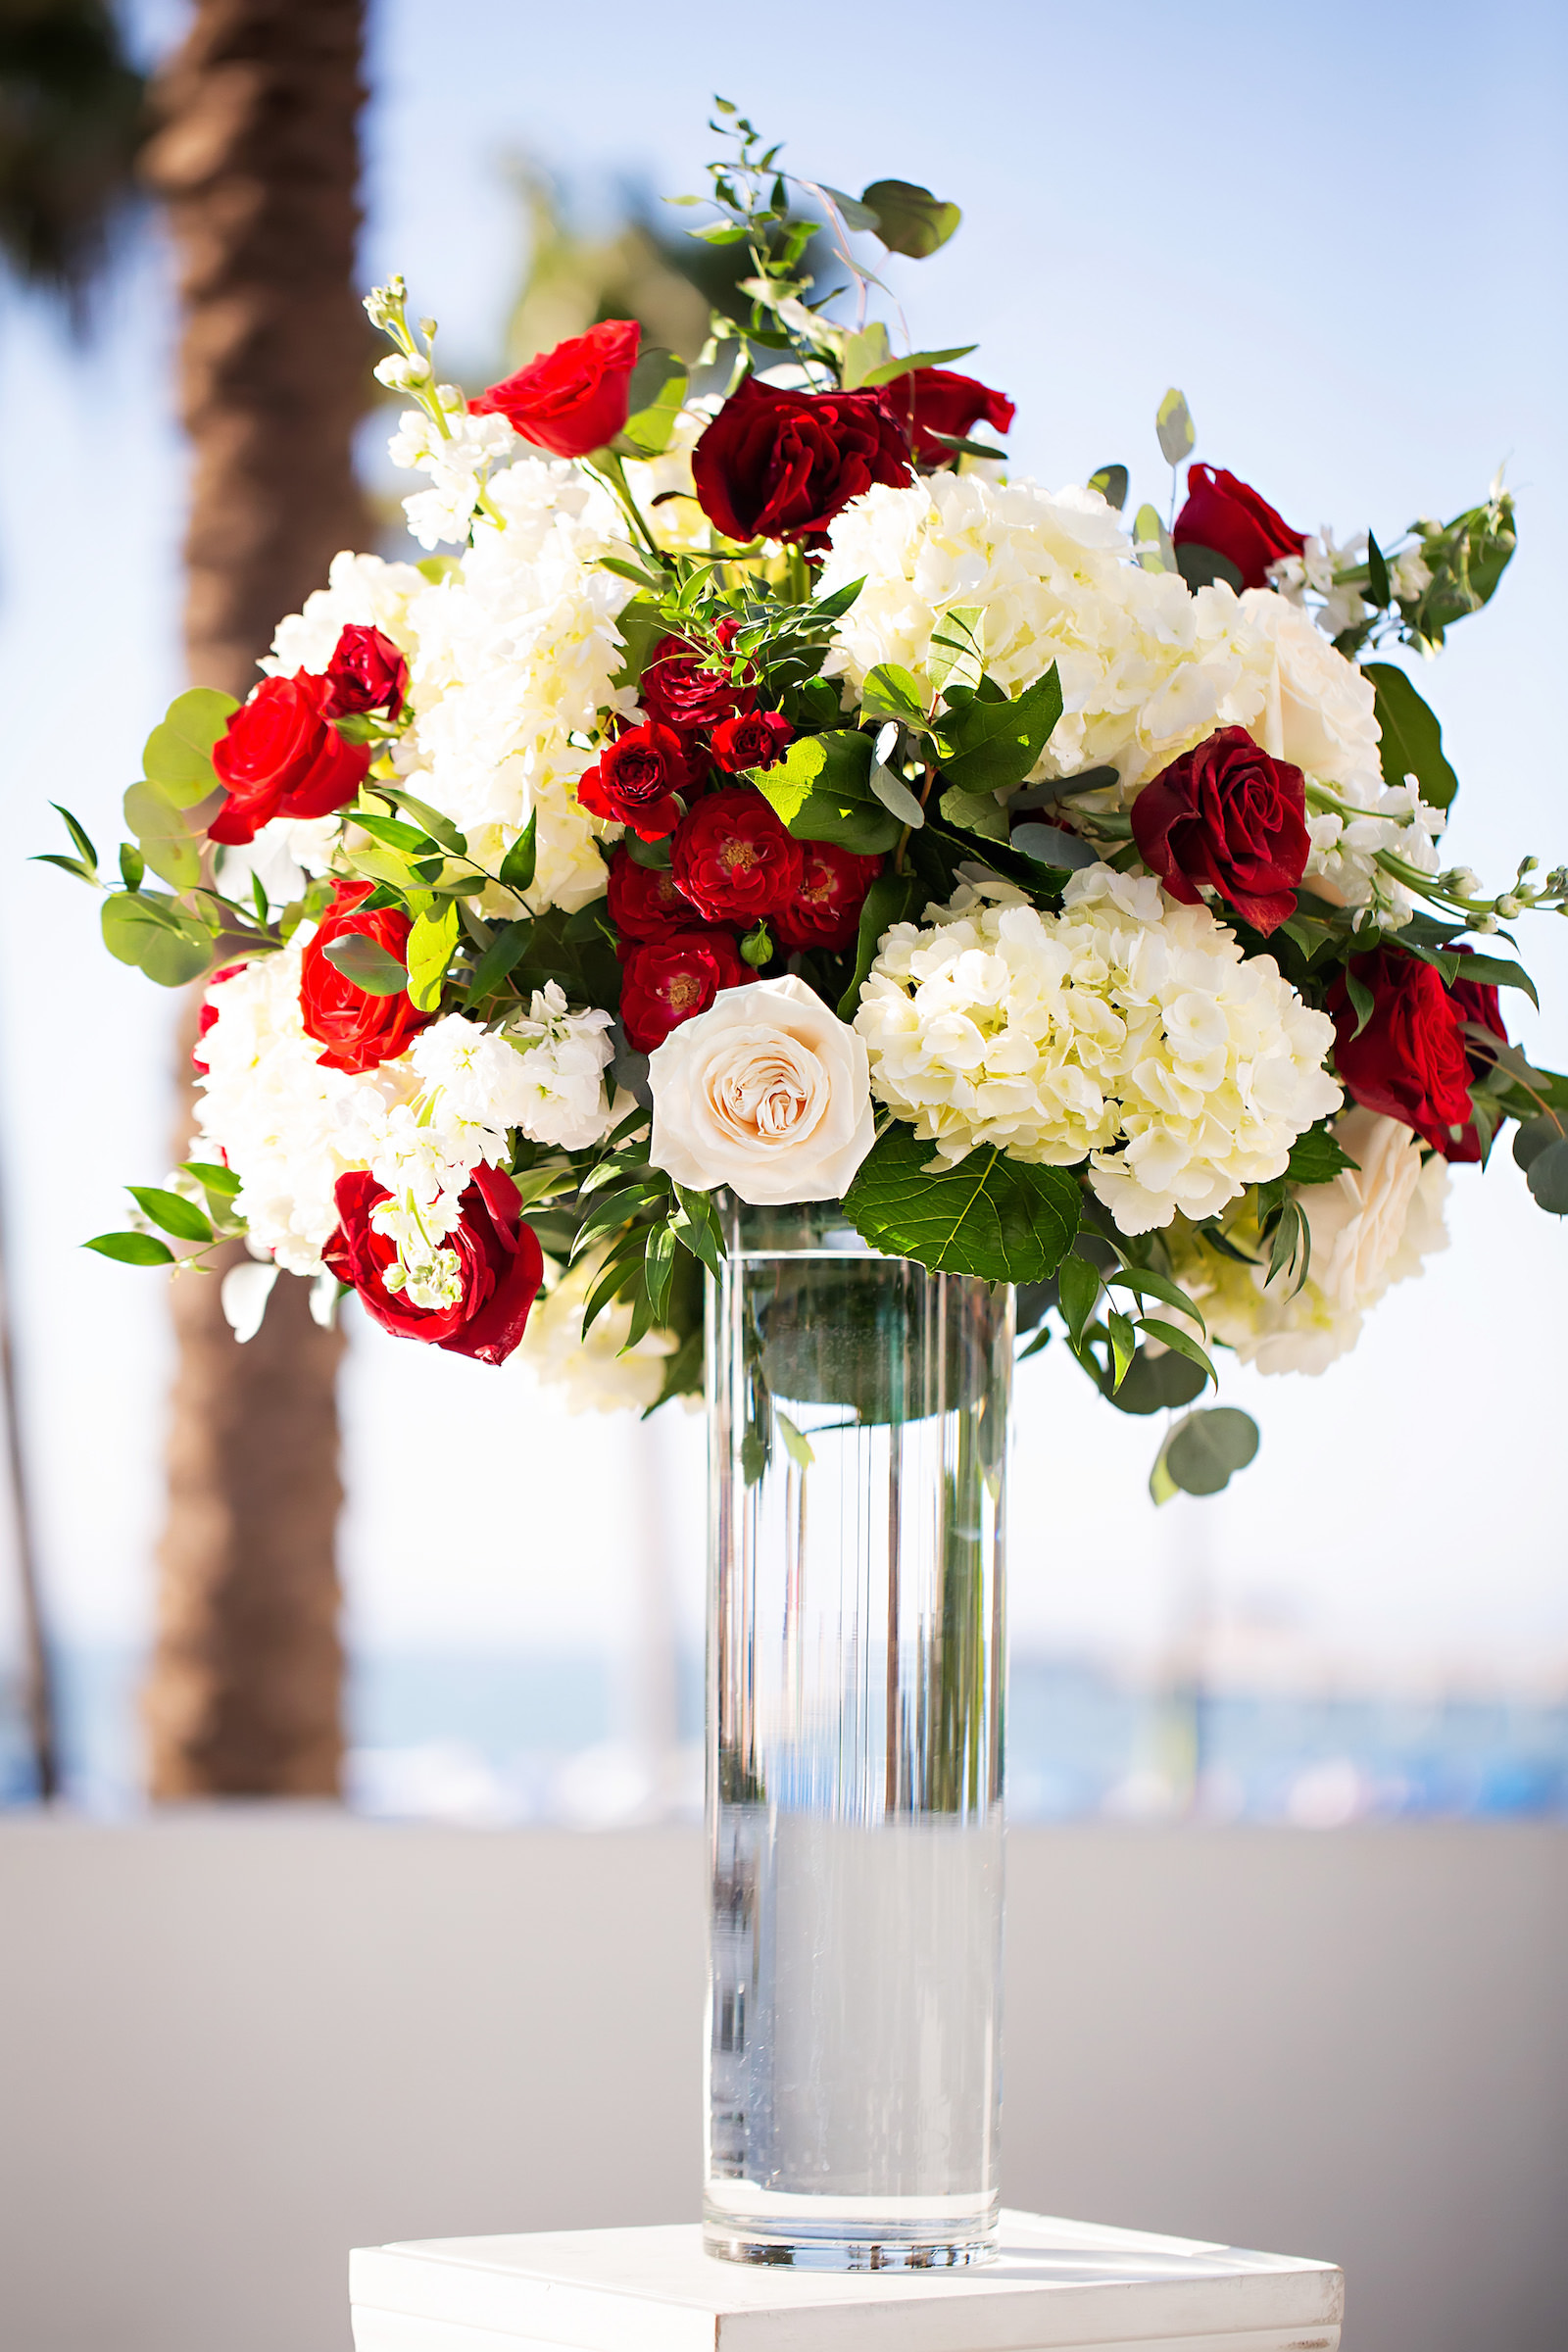 White and Red Rose Bouquet Detailing for Florida Hotel Wedding Ceremony | Florida Florist Save the Date Florida | Florida Planner Elegant Affairs by Design